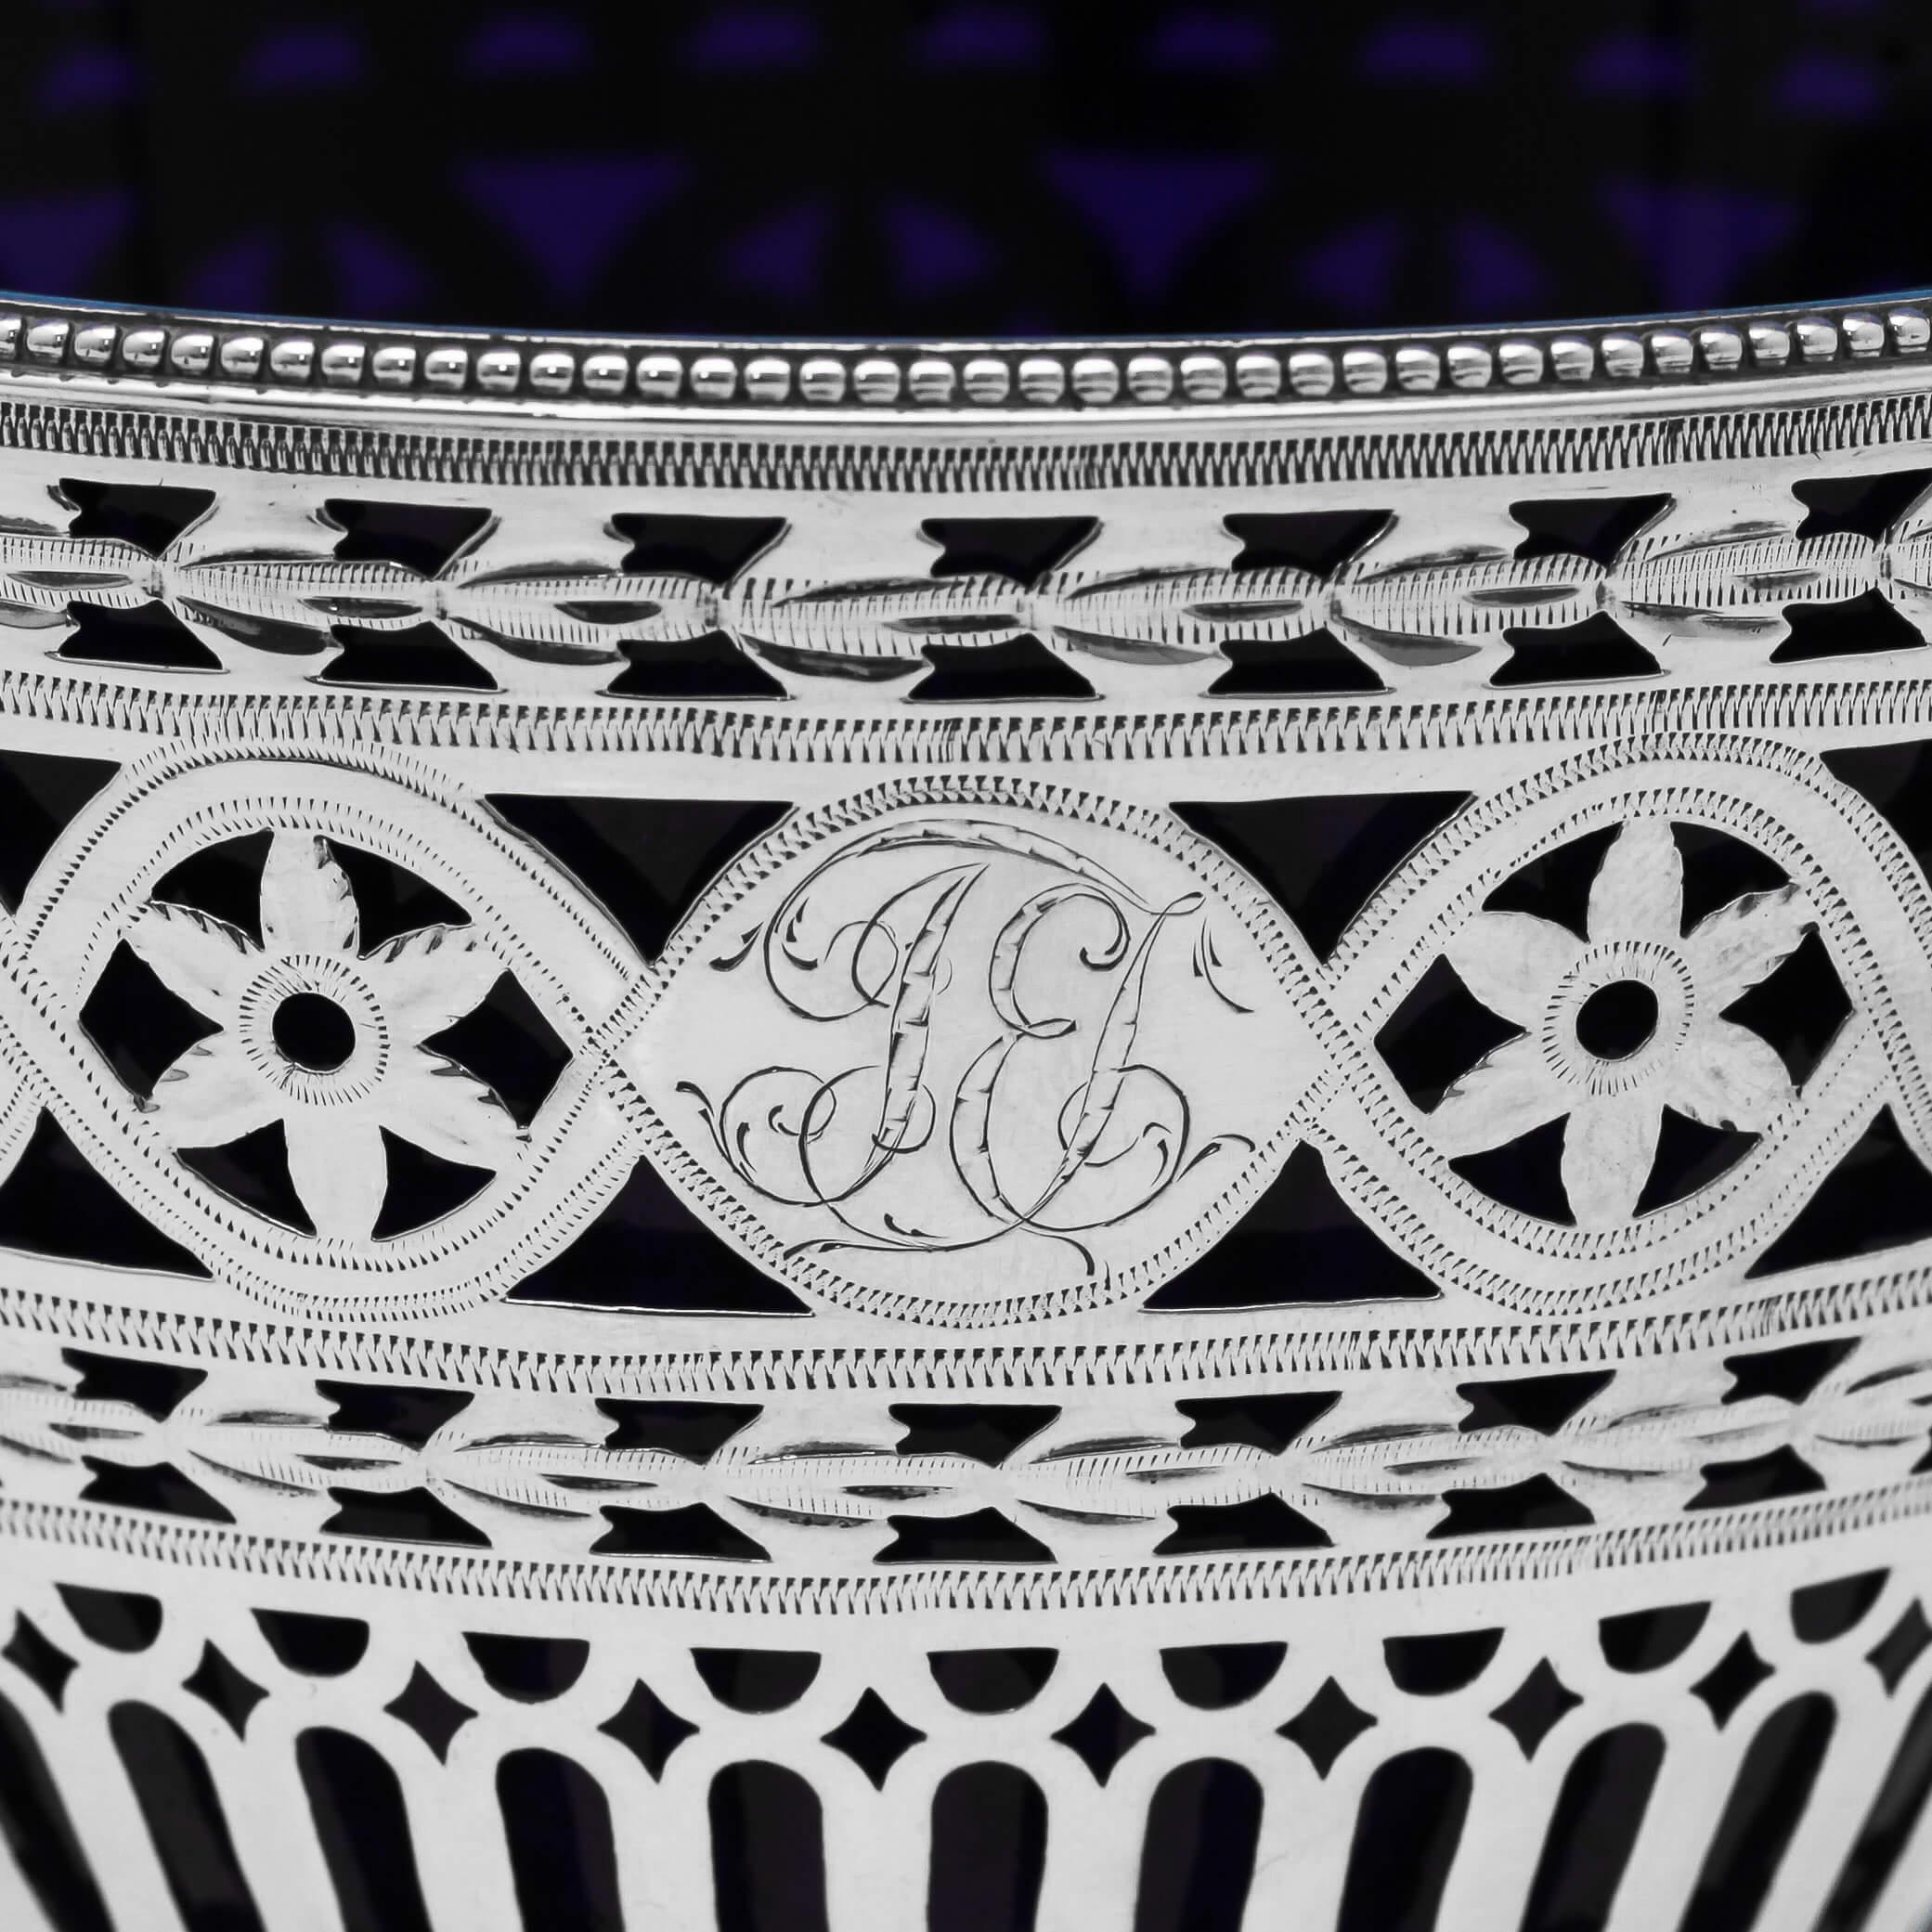 Hallmarked in London in 1781 by Robert Hennell I, this striking, George III, antique sterling silver sugar basket, features pierce and engraved decoration, bead borders and a blue glass liner. The central cartouche is engraved with a monogram. The